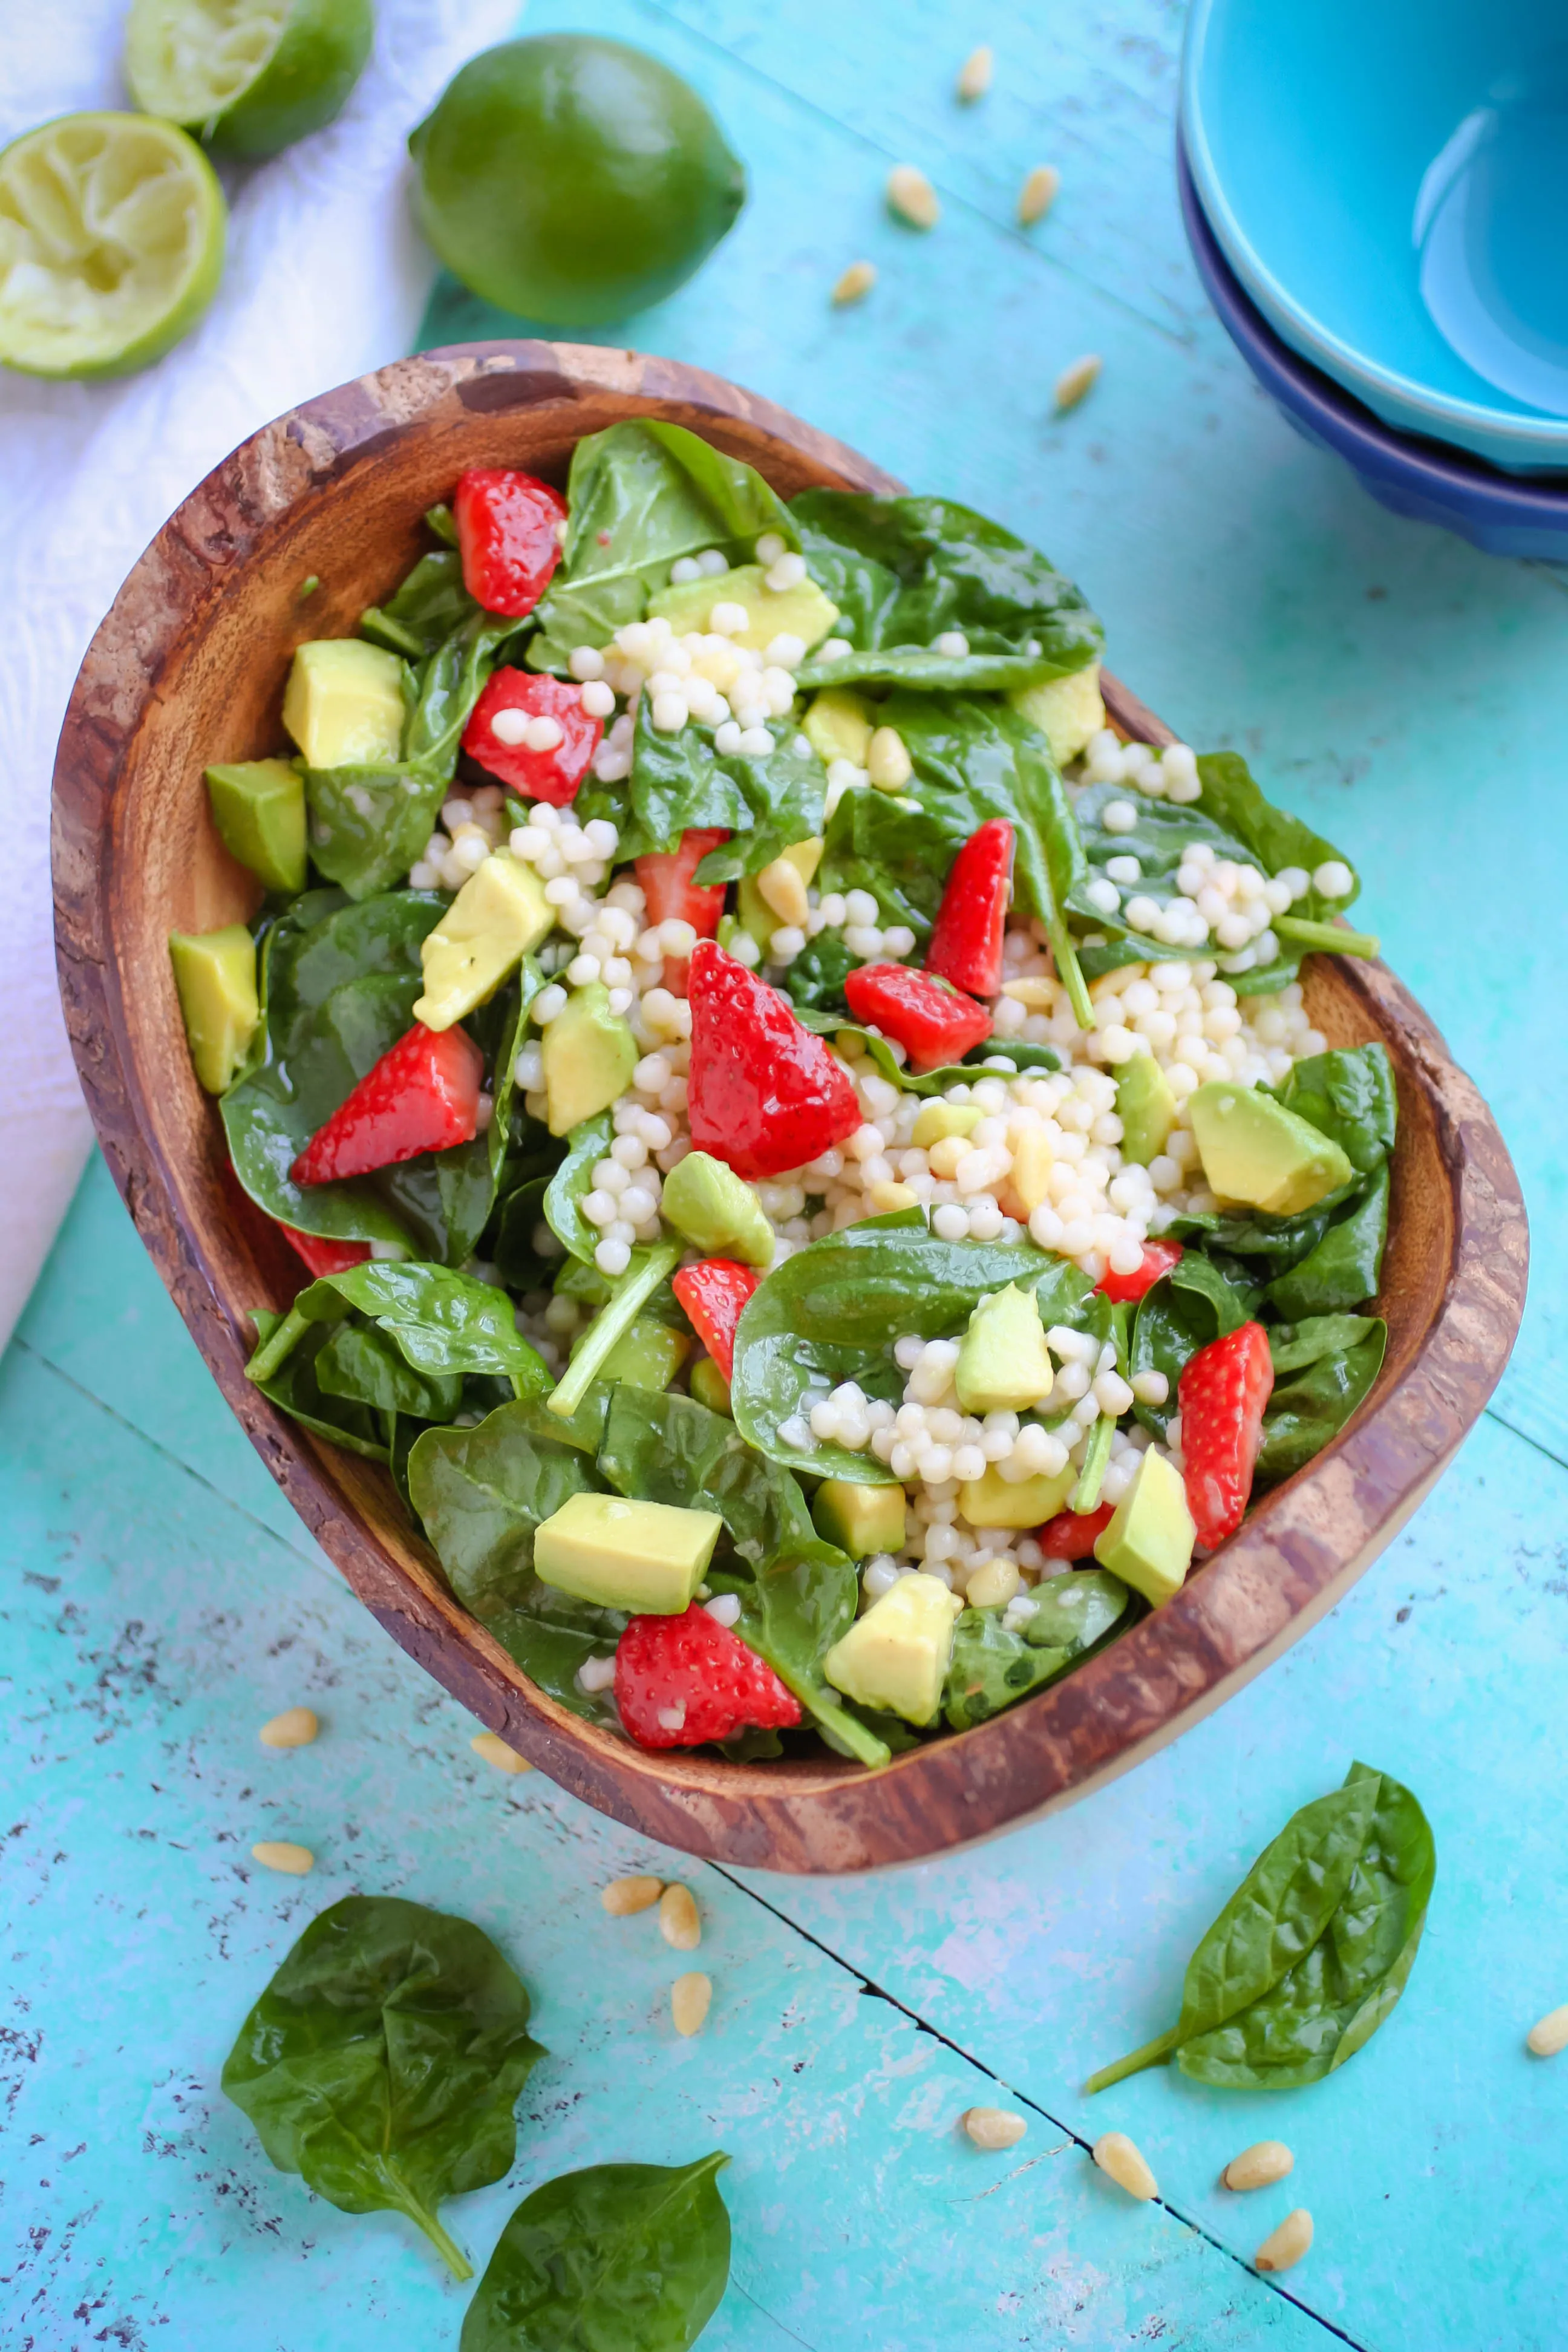 Spinach and Couscous Salad with Strawberries, Avocado & Honey-Lime Dressing is a fabulous salad for the summer. Spinach and Couscous Salad with Strawberries, Avocado & Honey-Lime Dressing is what you need to make for a great light meal.